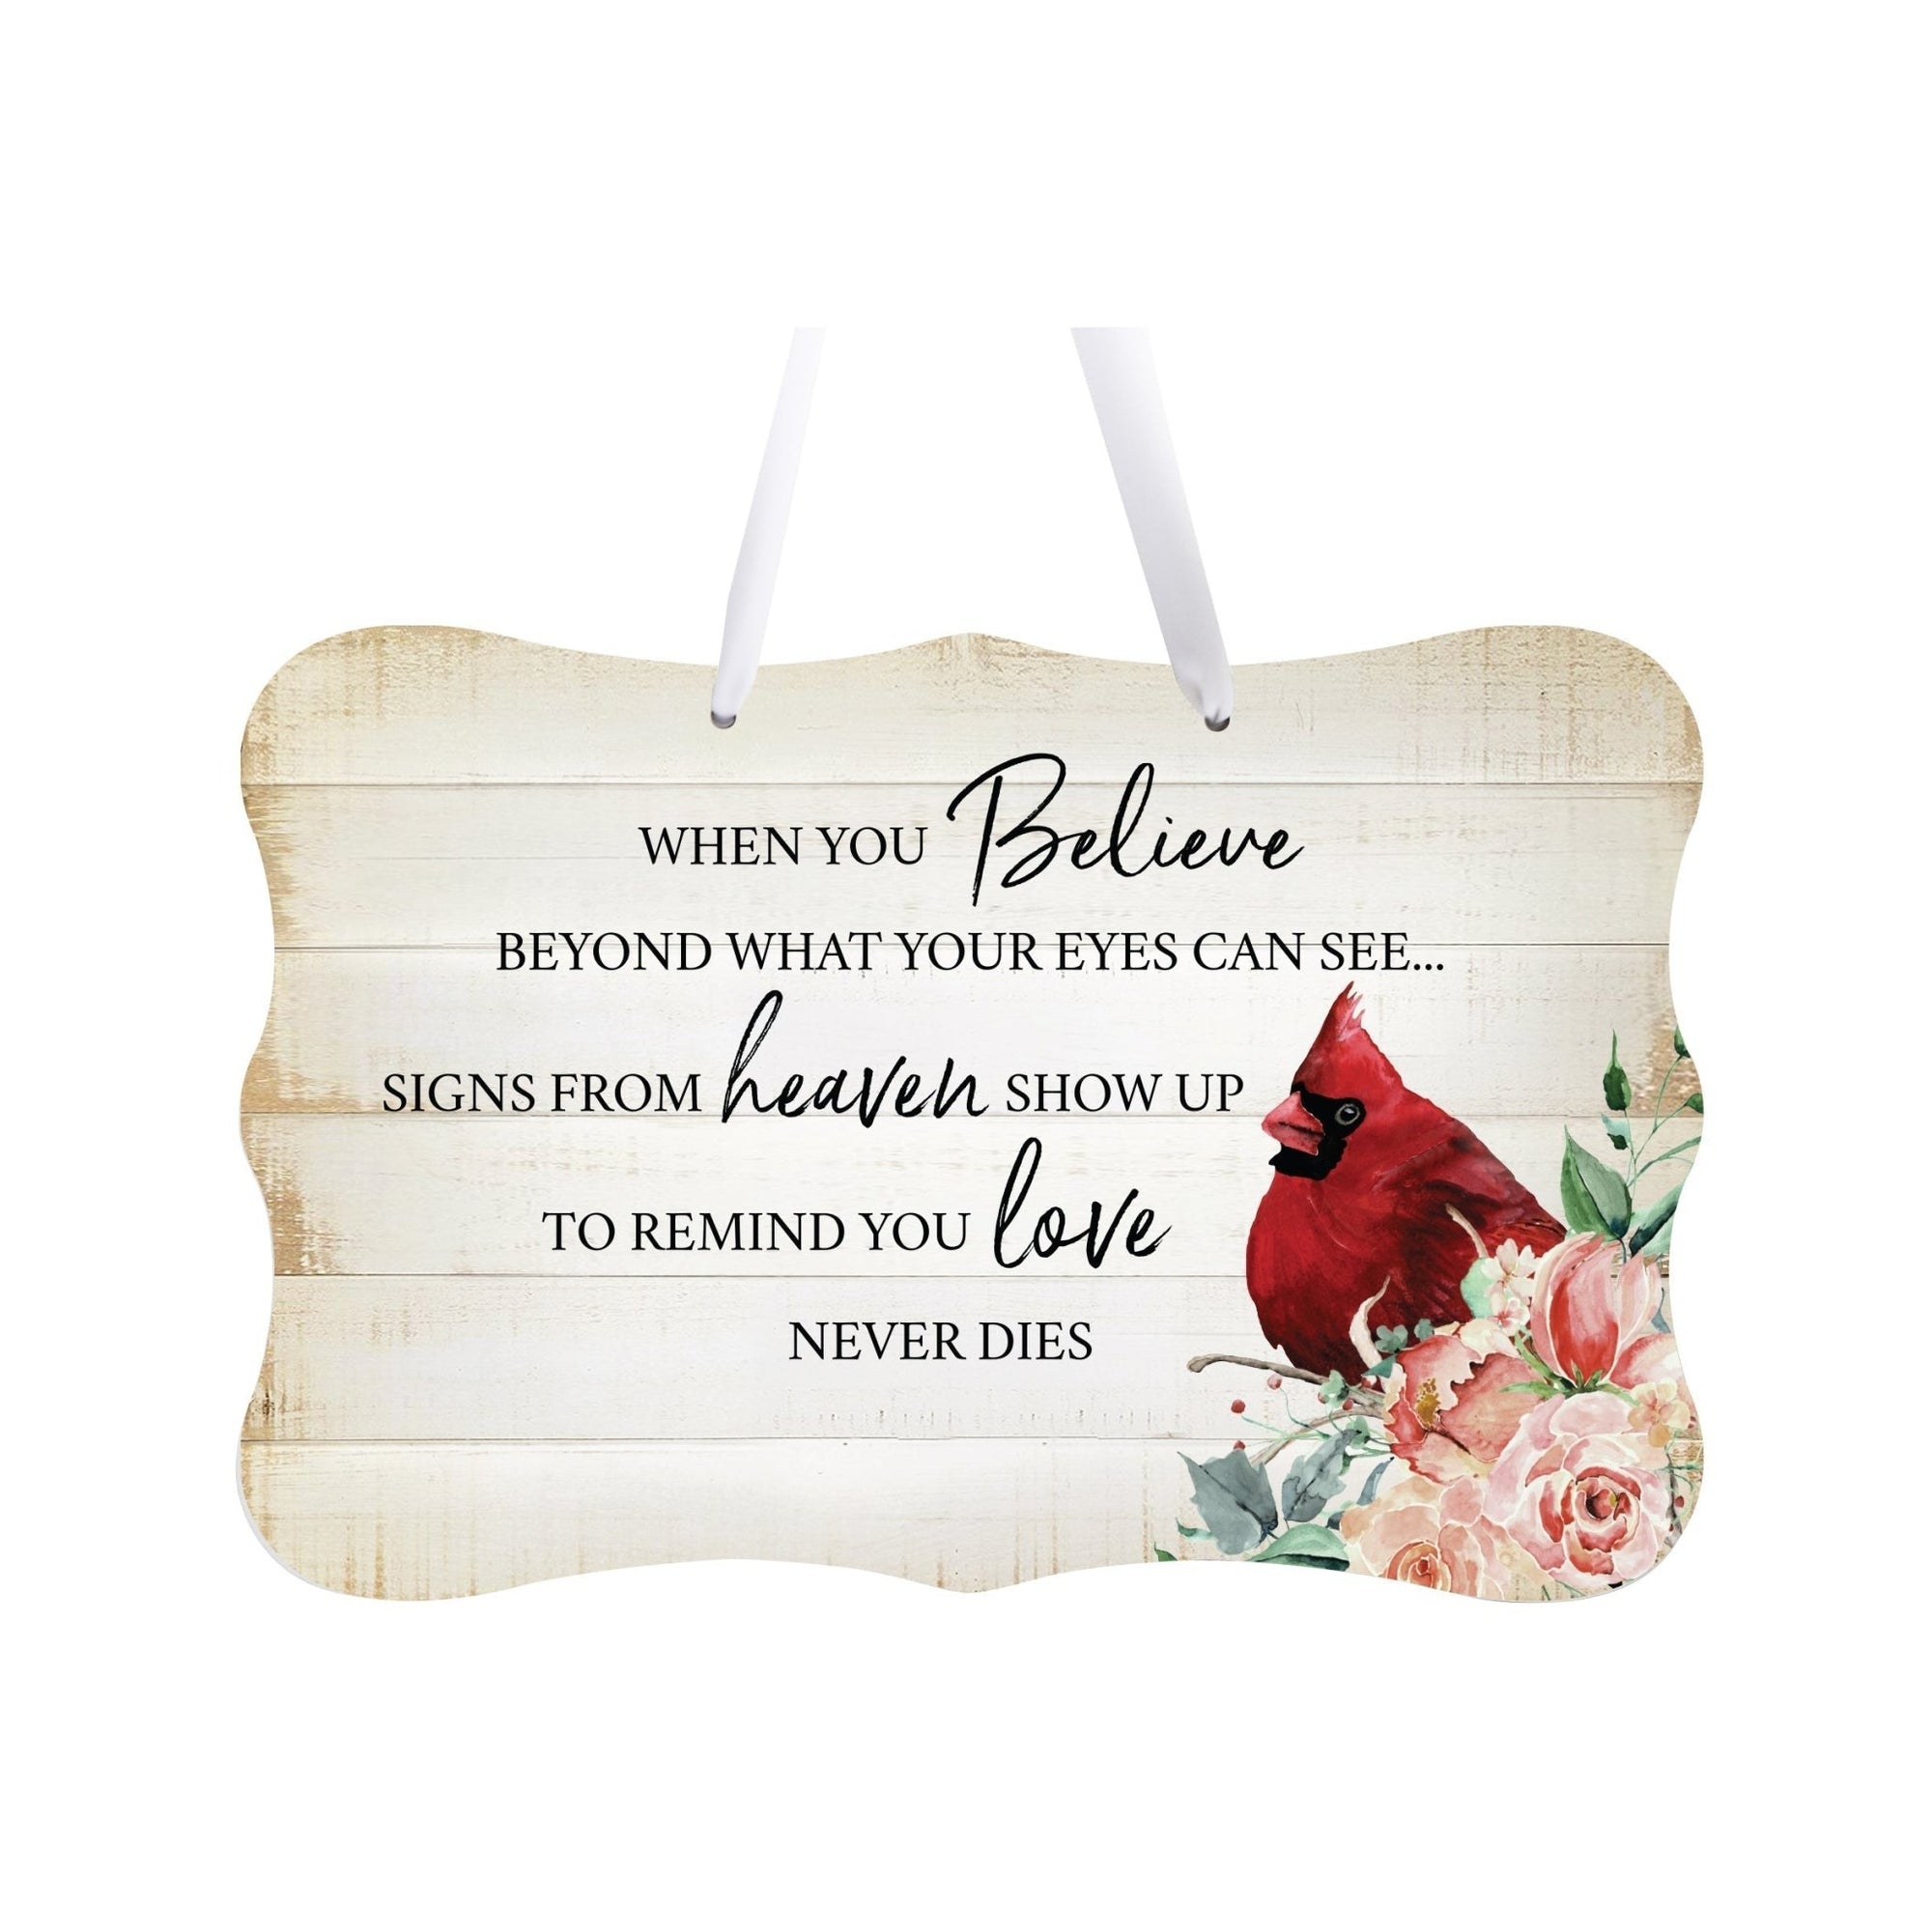 Memorial gifts for the loss of a loved one, including this elegant wall hanging sign, designed to offer comfort and support during difficult times.